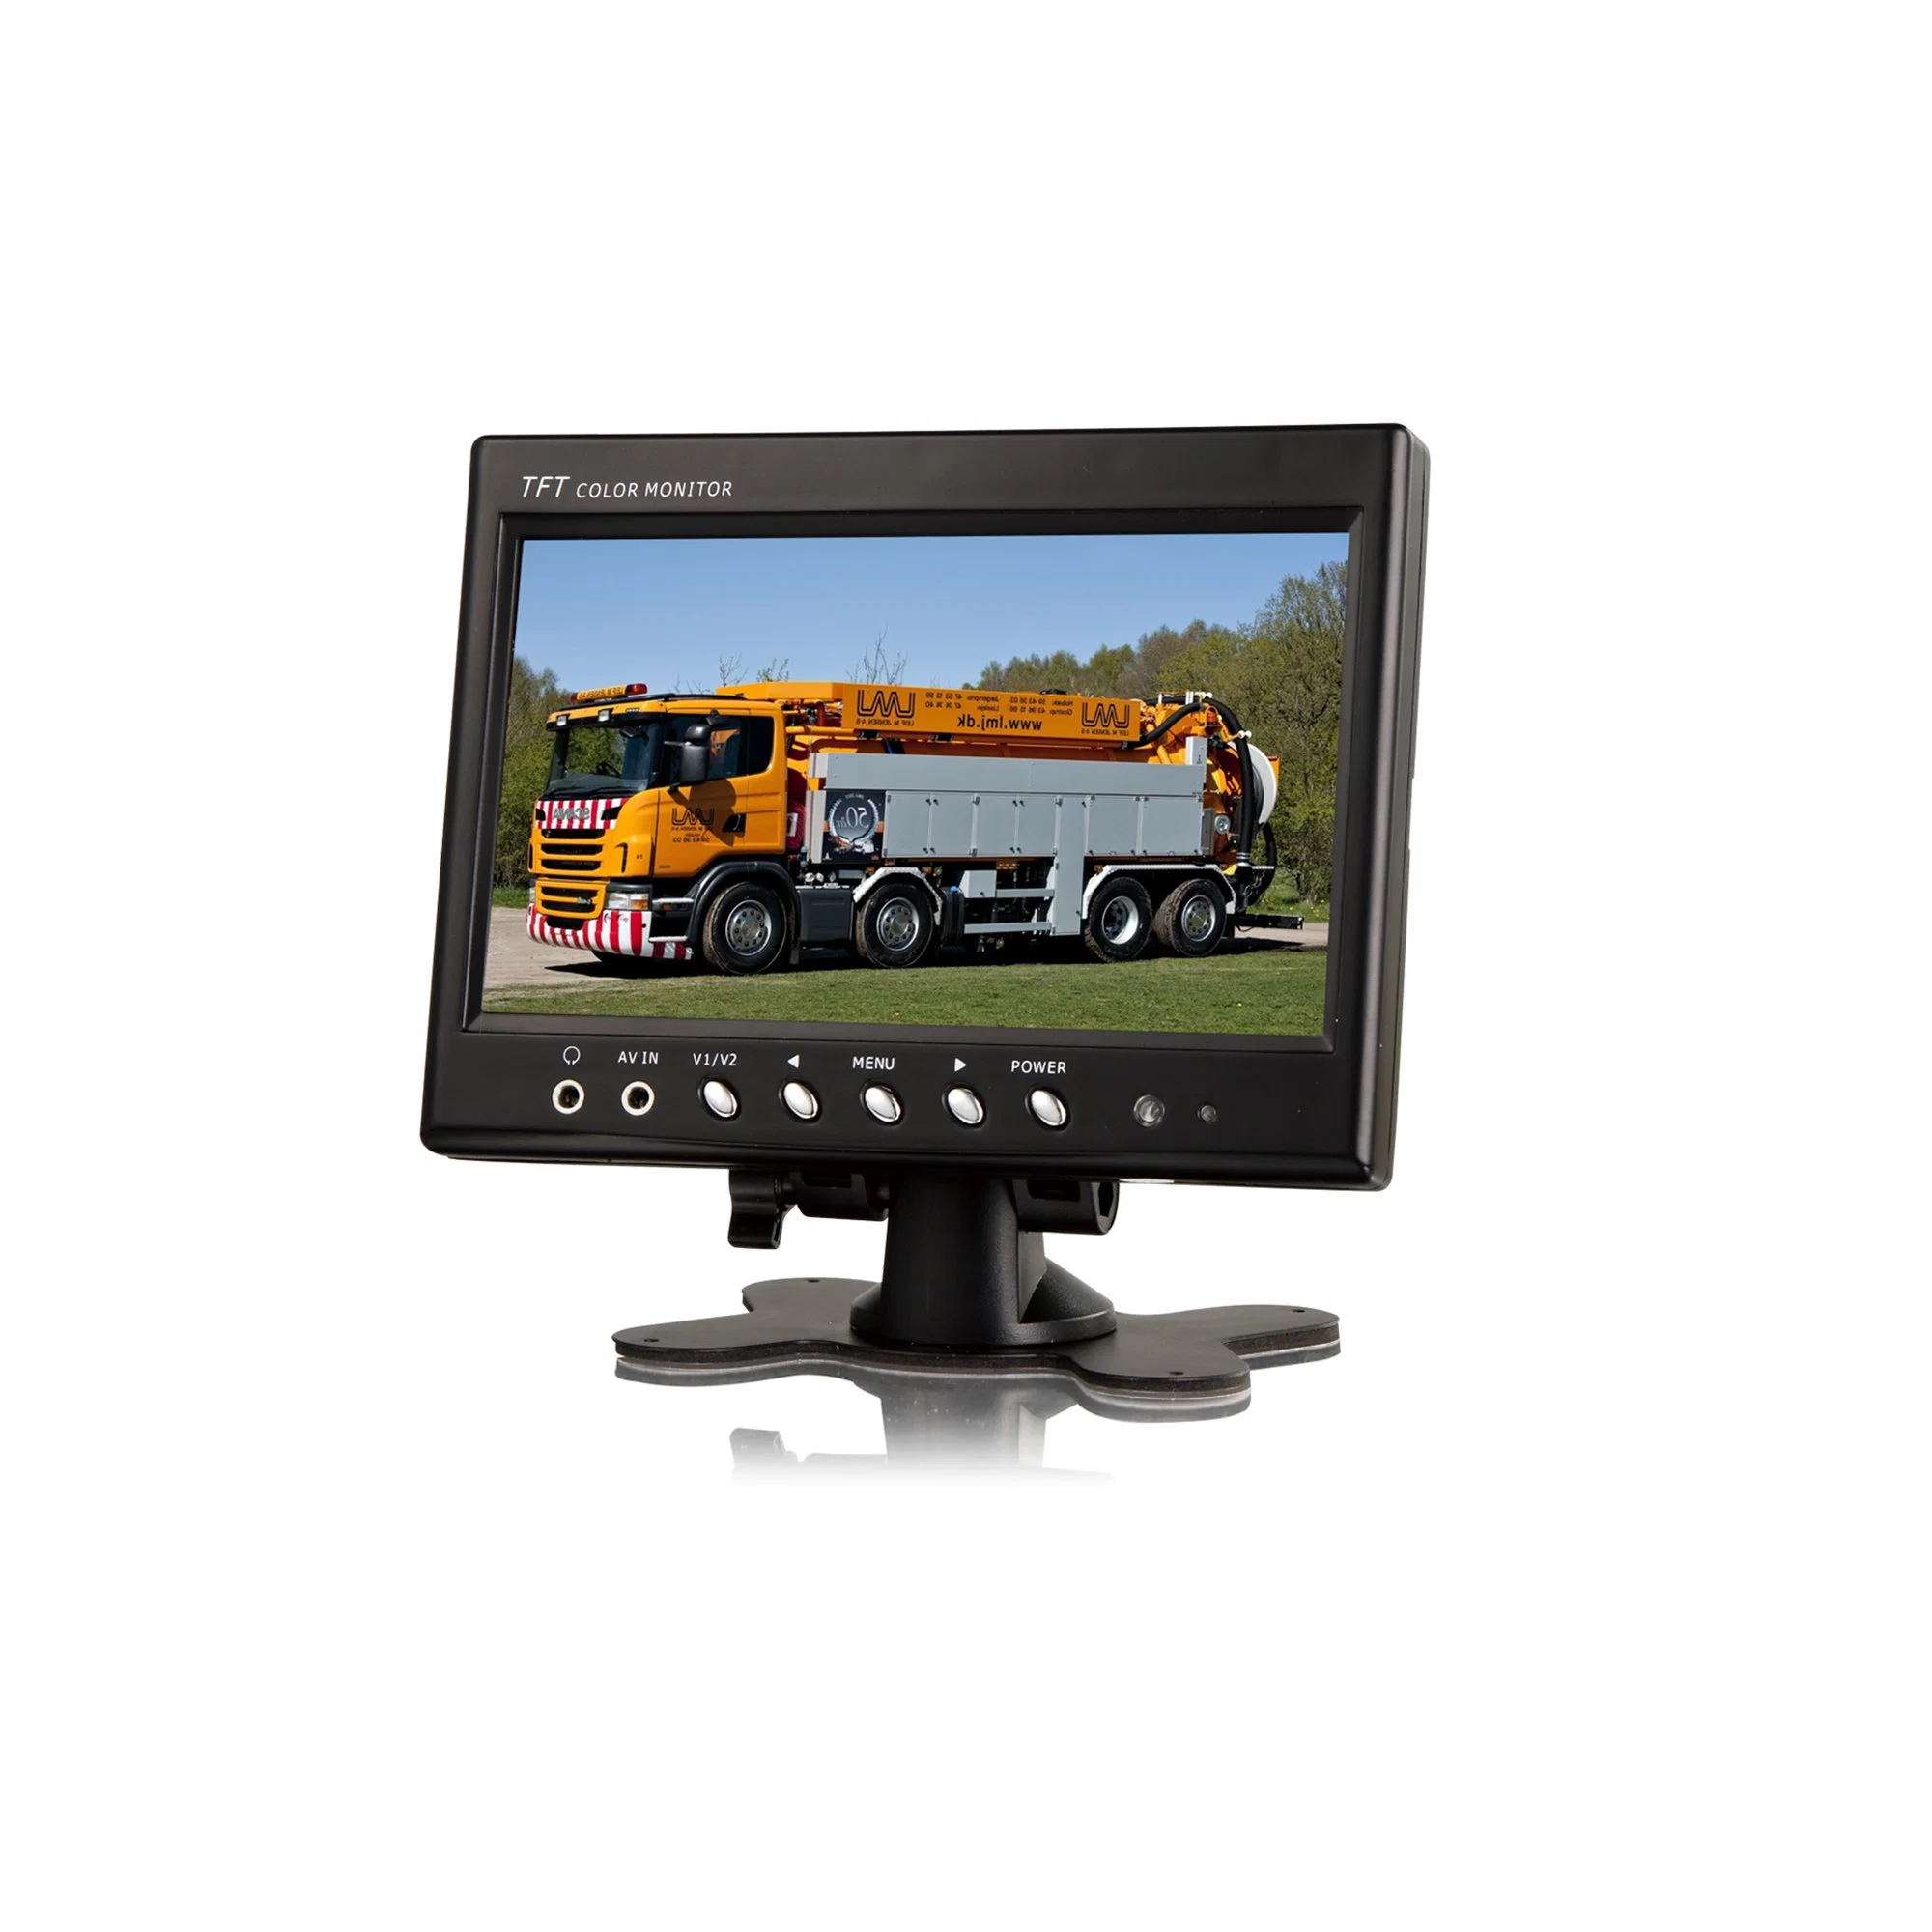 7 Inch TFT LCD Monitor for Car Bus Vehicle CCTV Security System